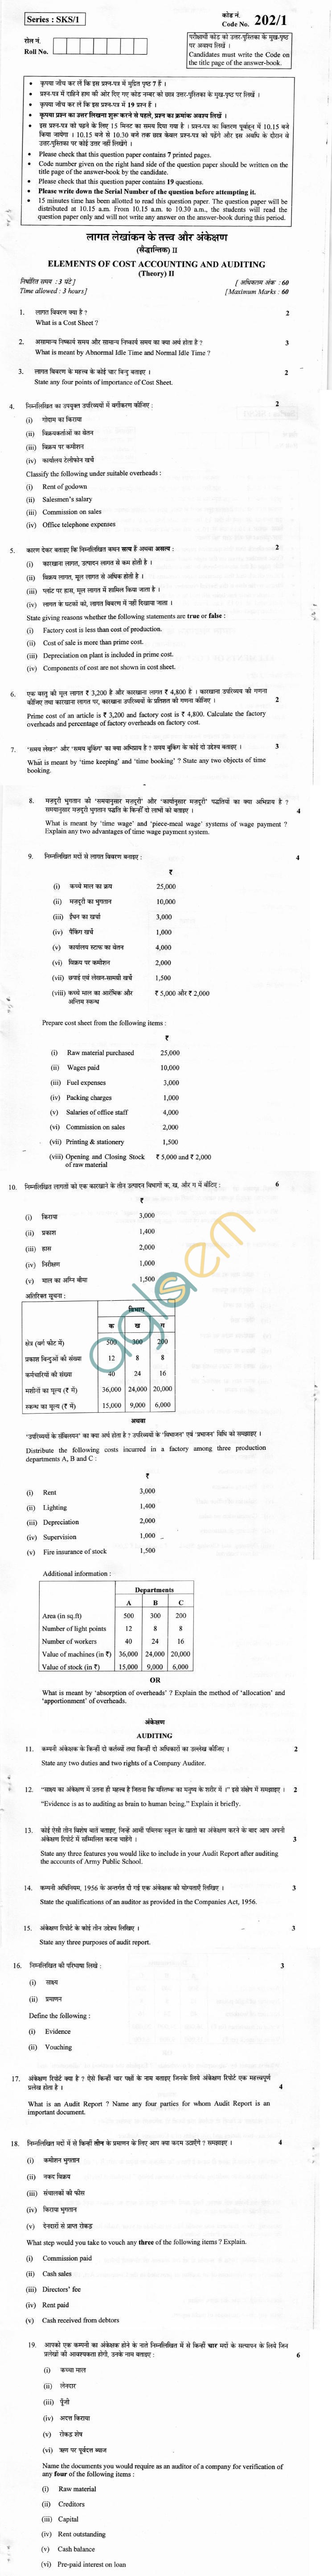 CBSE Board Exam 2013 Class XII Question Paper - Elements of Cost Accounting and Auditing